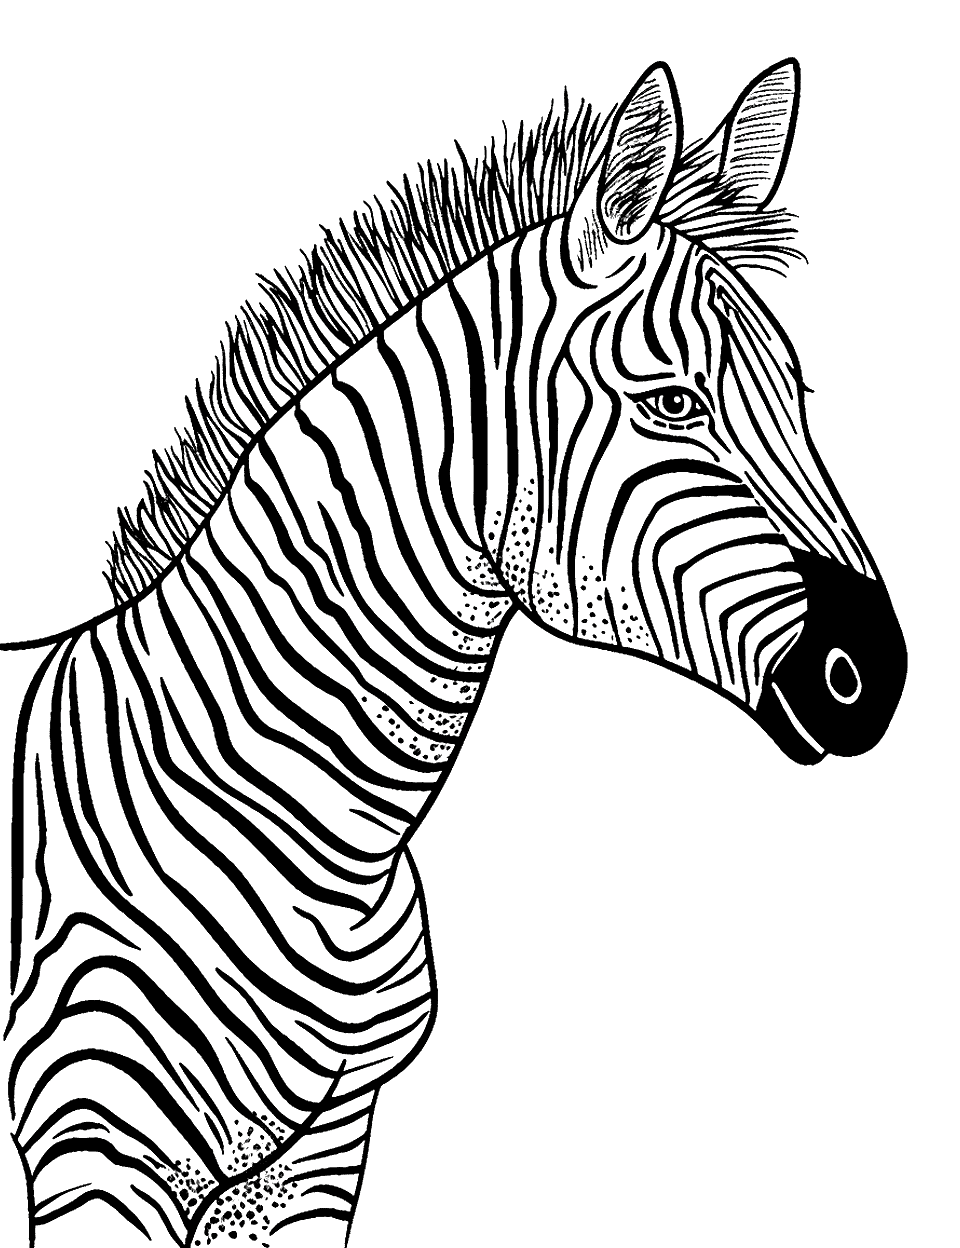 Zebra Profile Portrait Coloring Page - A close-up side view of a zebra’s head highlighting its striped pattern.